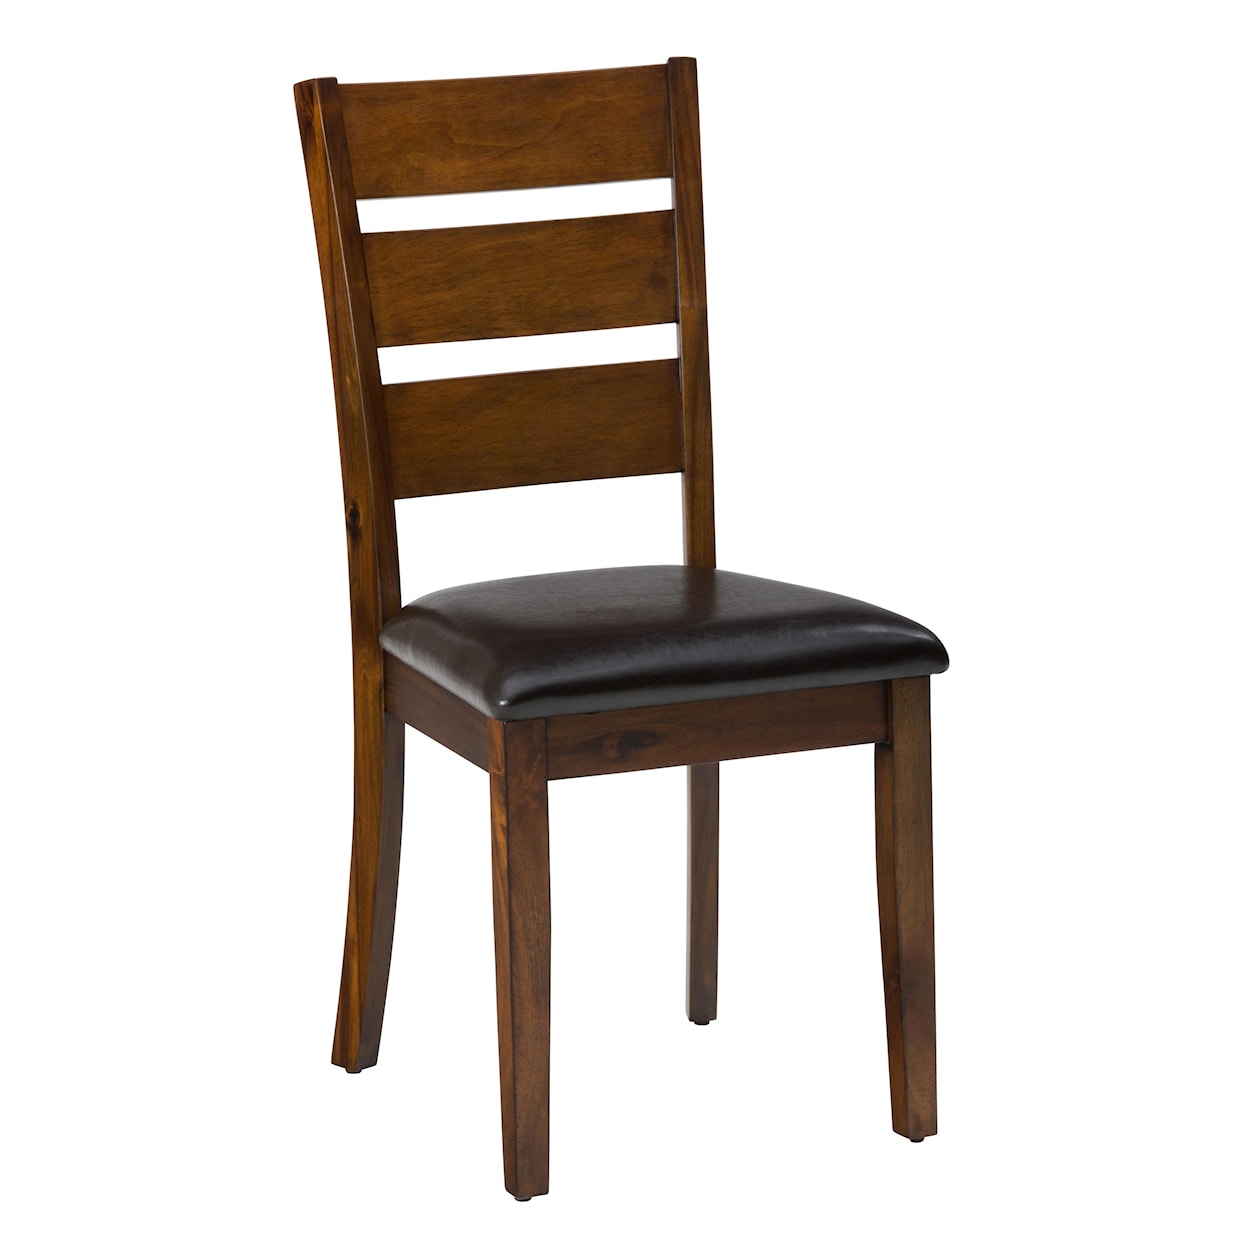 VFM Signature Plantation 5 Pack- Table with 4 Chairs